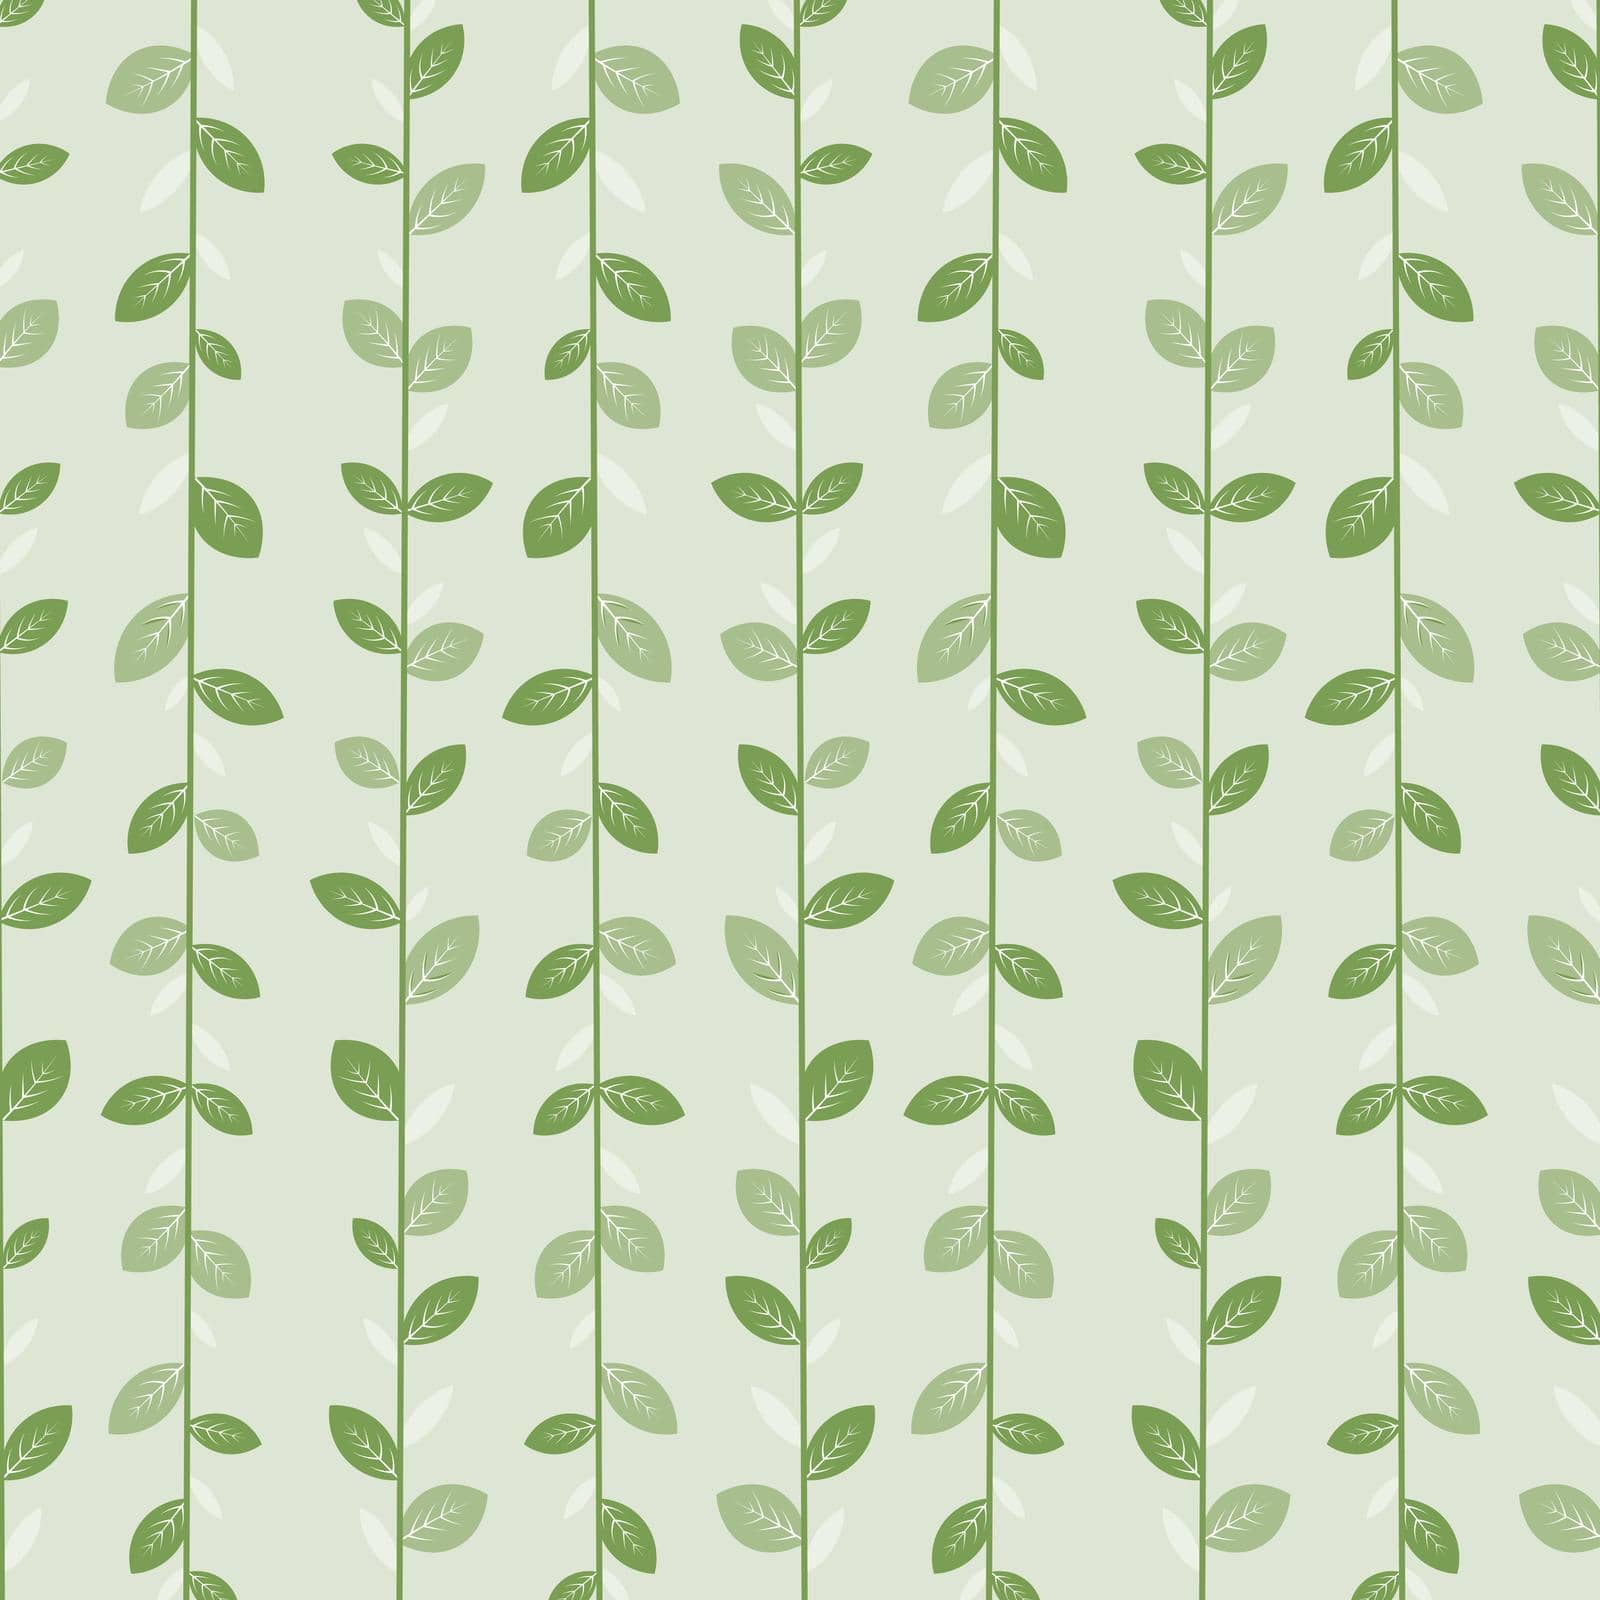 Green leaves natural pattern with graceful branches. Vector illustration